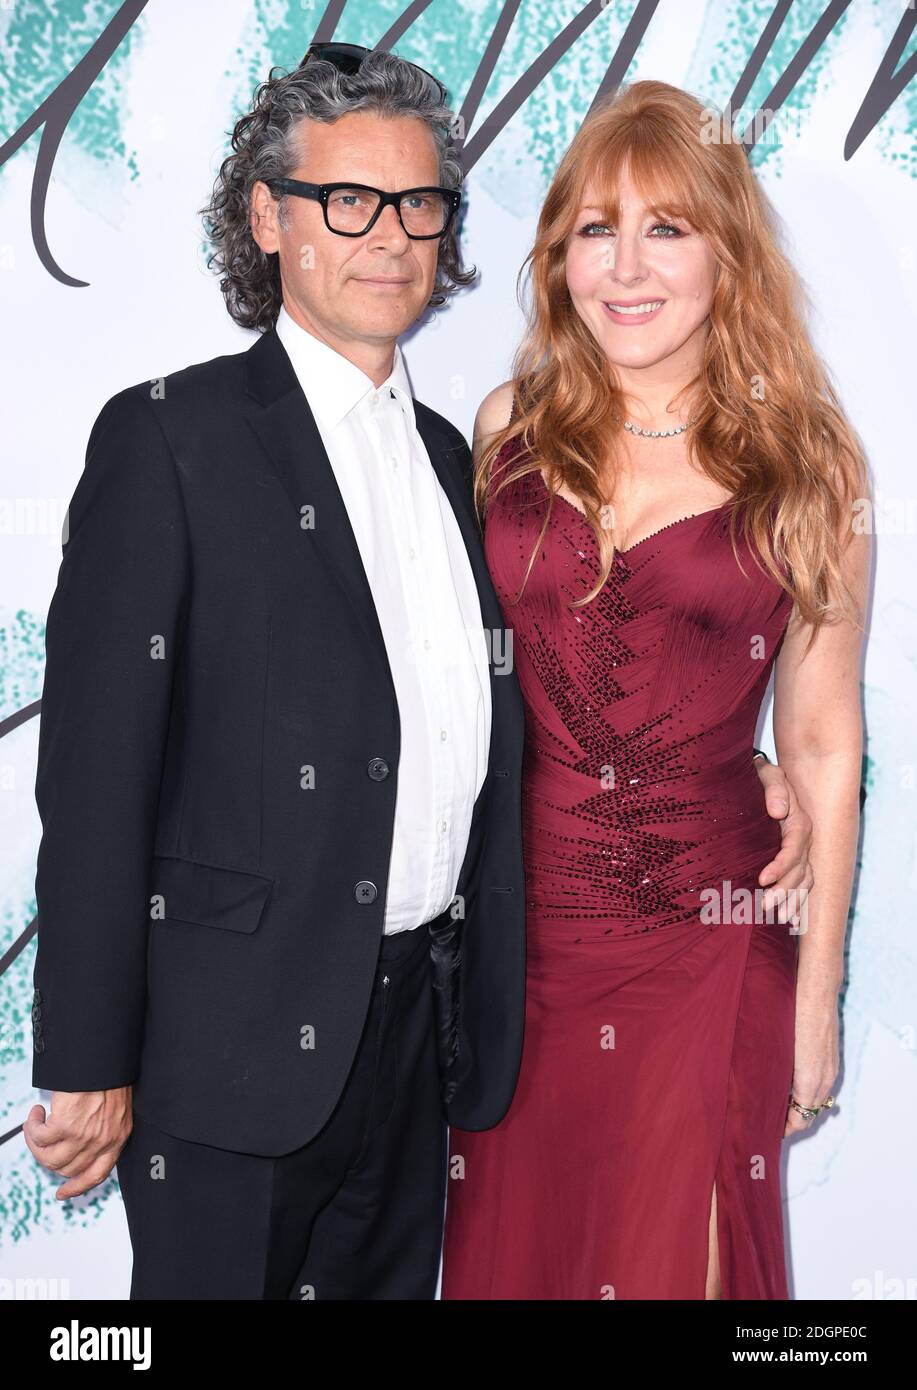 George Waud and Charlotte Tilbury attending the Serpentine Summer Party 2017, presented by the Serpentine and Chanel, held at the Serpentine Galleries Pavilion, in Kensington Gardens, London. Picture Credit should read Doug Peters/EMPICS Entertainment Stock Photo